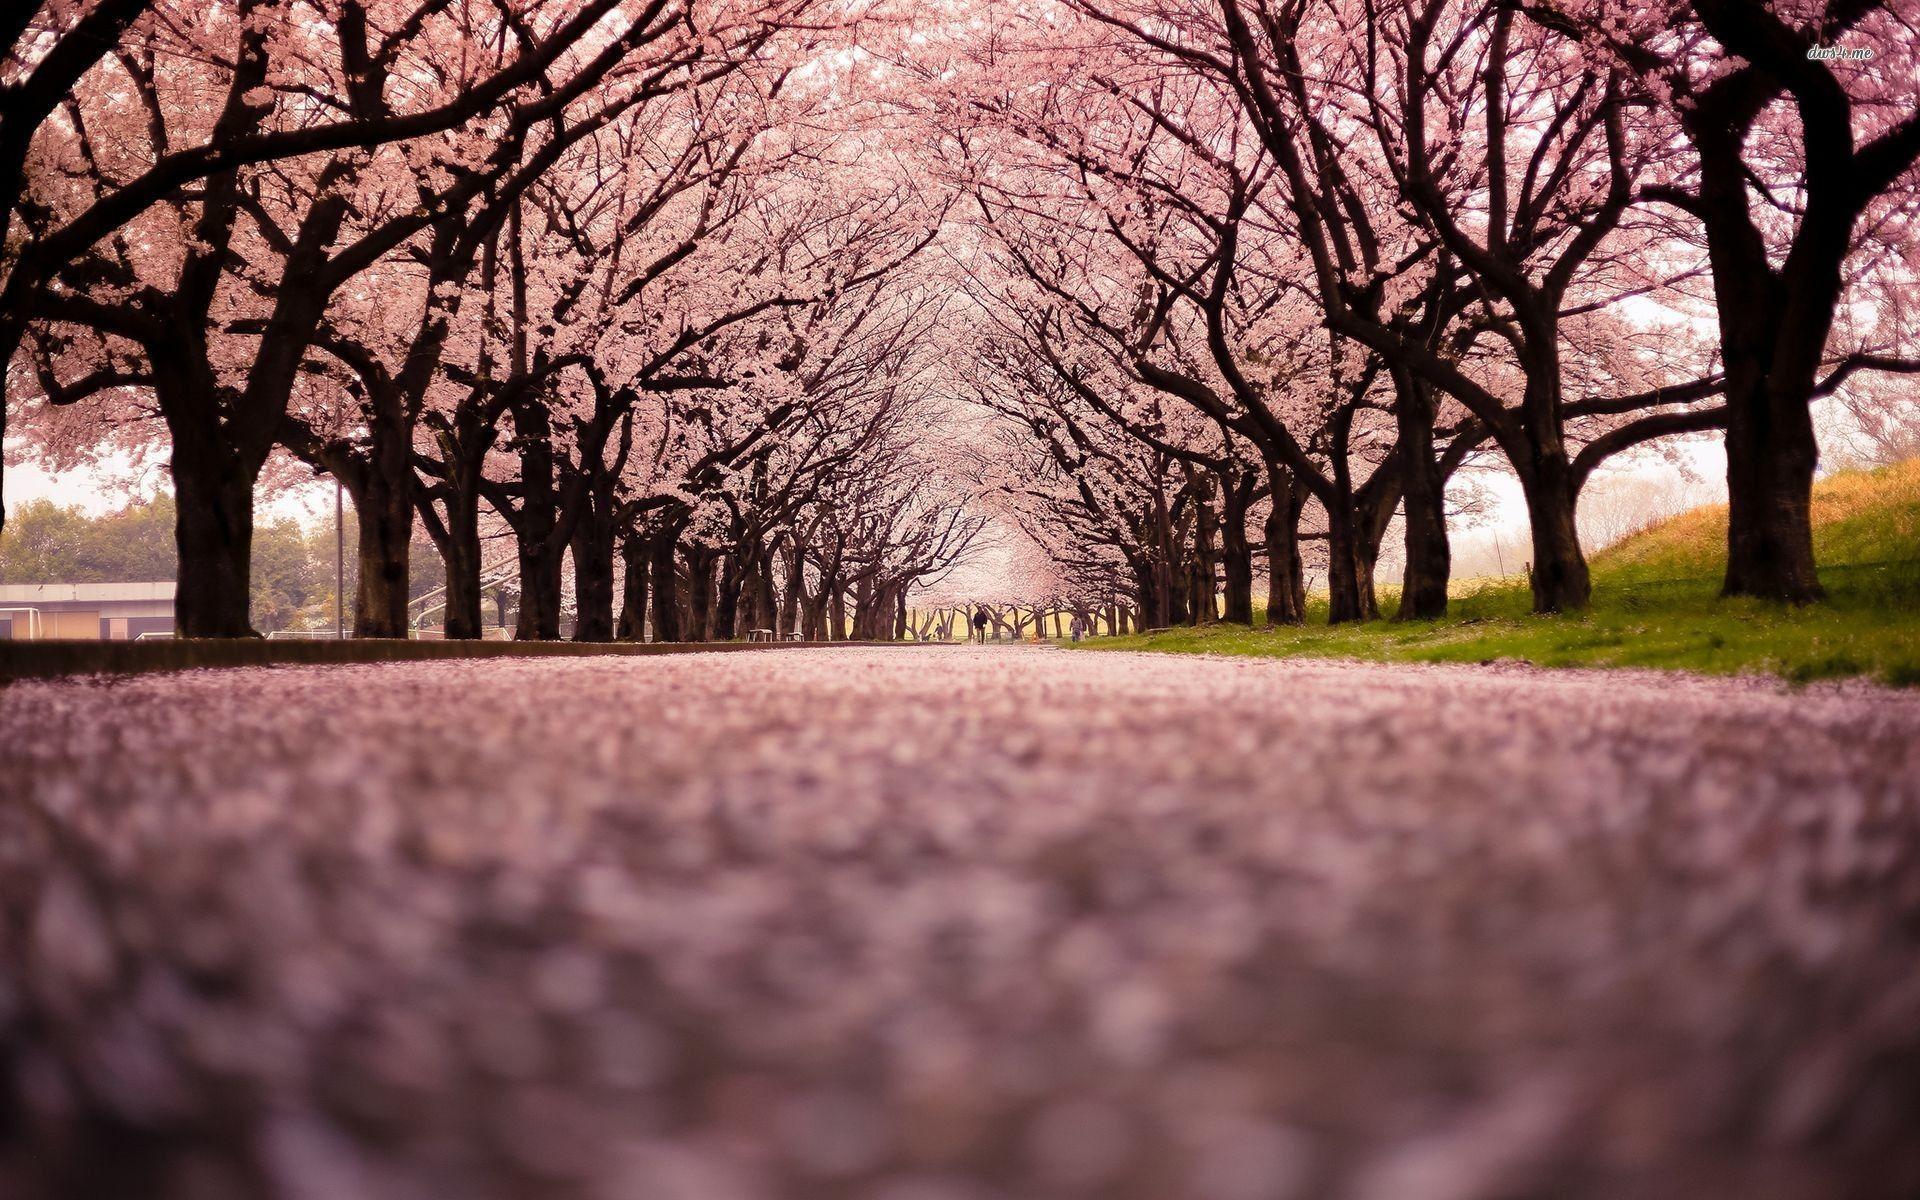 Japan Cherry Blossom Wallpapers - Top Free Japan Cherry Blossom